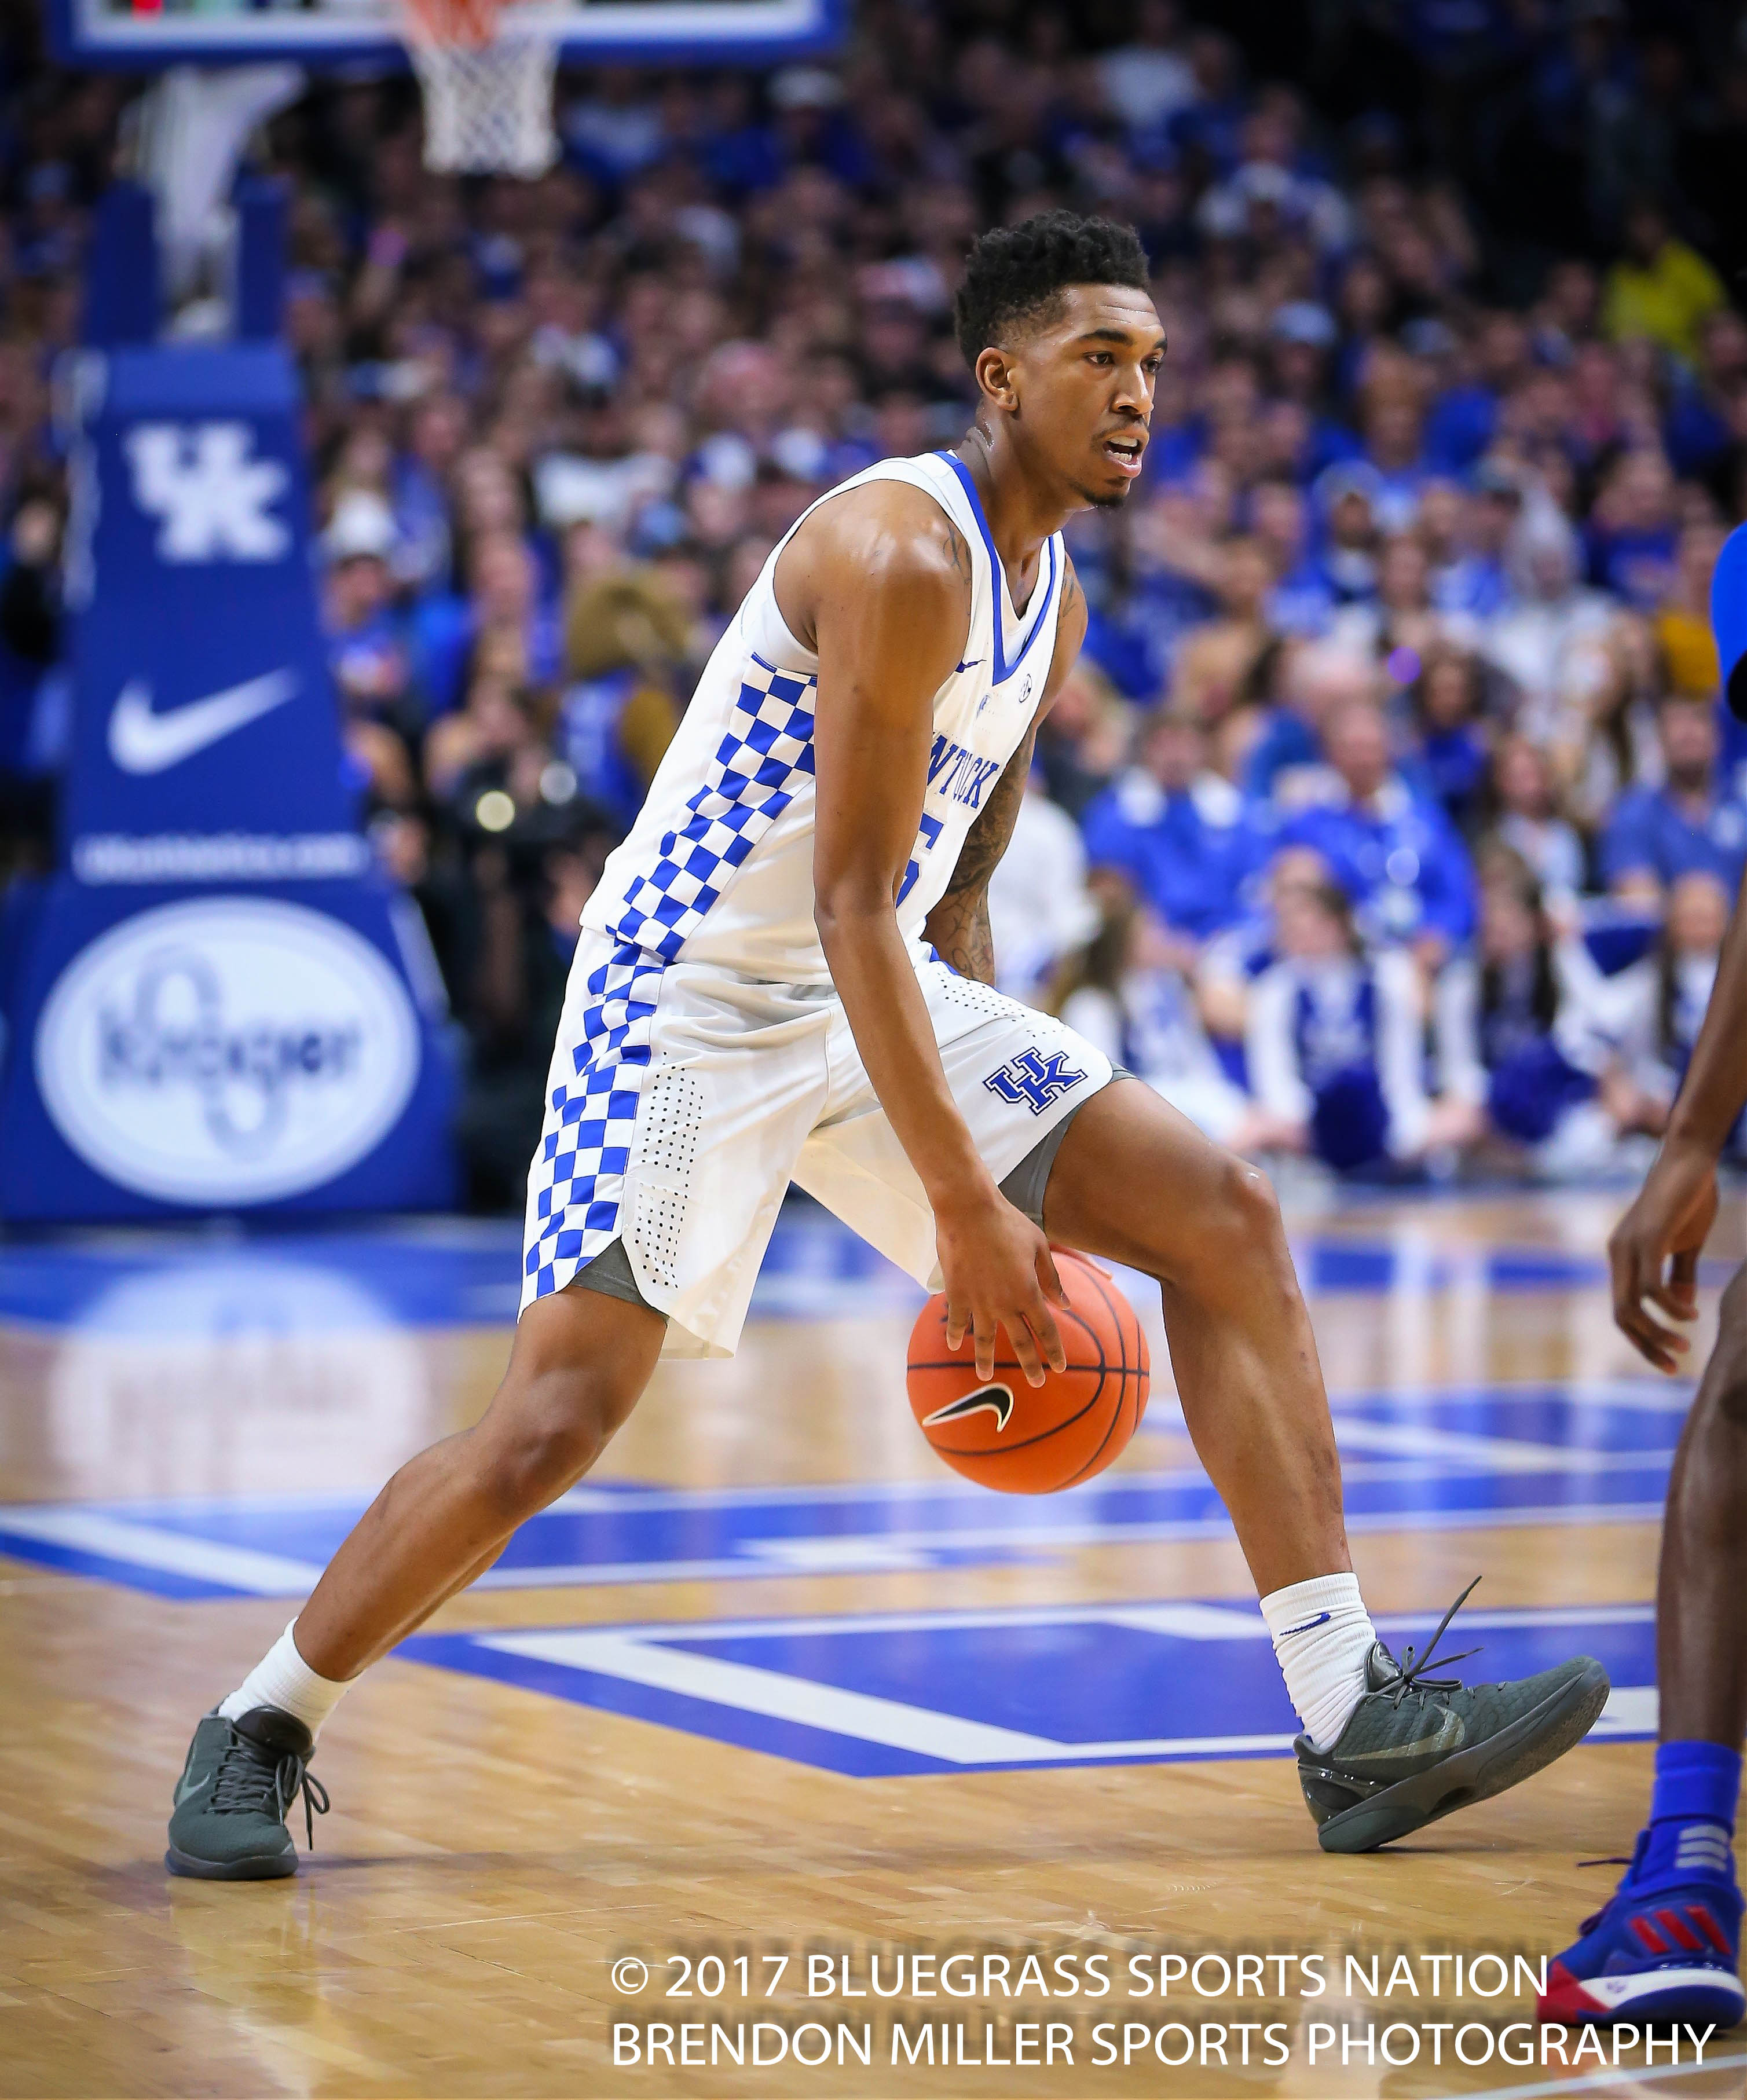 Malik Monk with drive against Kansas - Photo by Brendon Miller